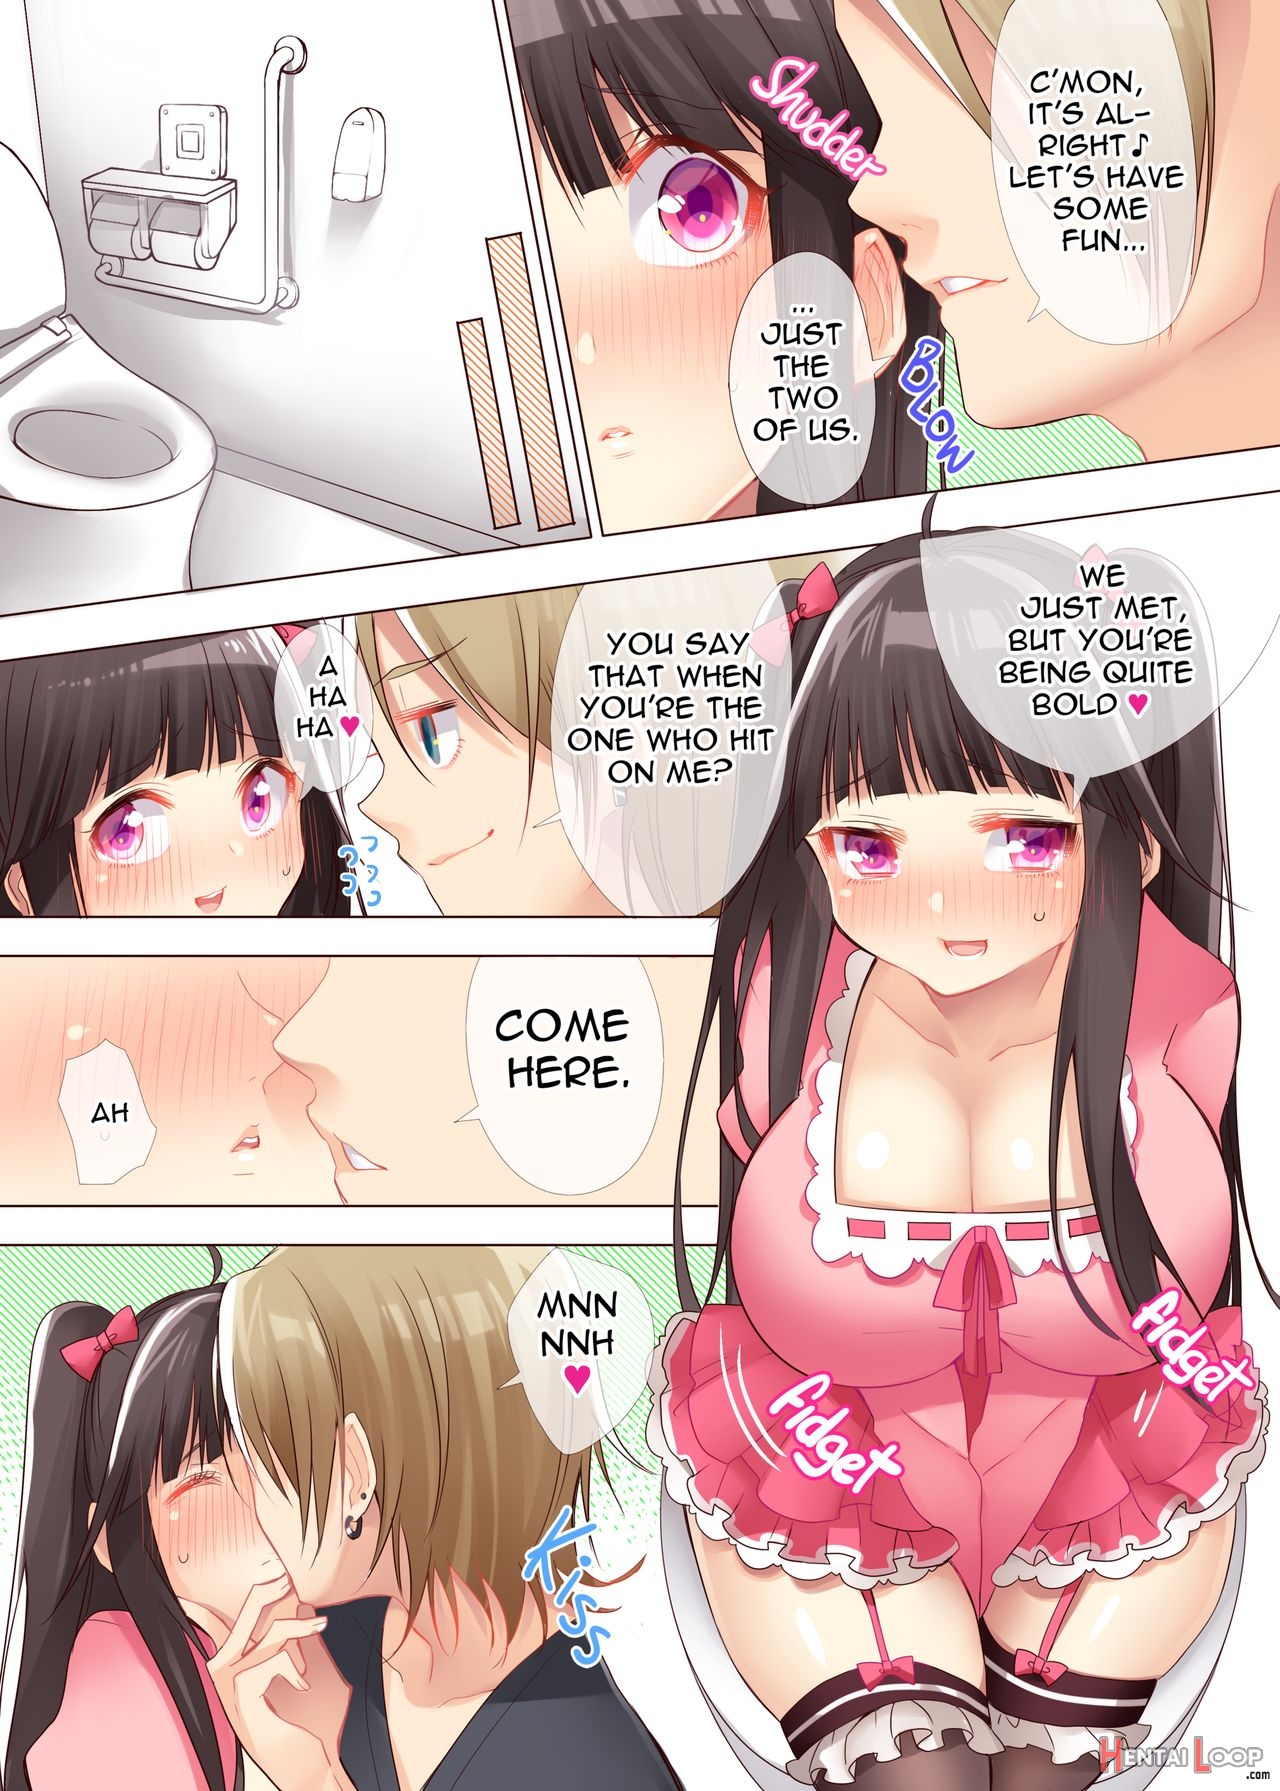 The Princess Of An Otaku Group Got Knocked Up By Some Piece Of Trash So She Let An Otaku Guy Do Her Too!? page 6